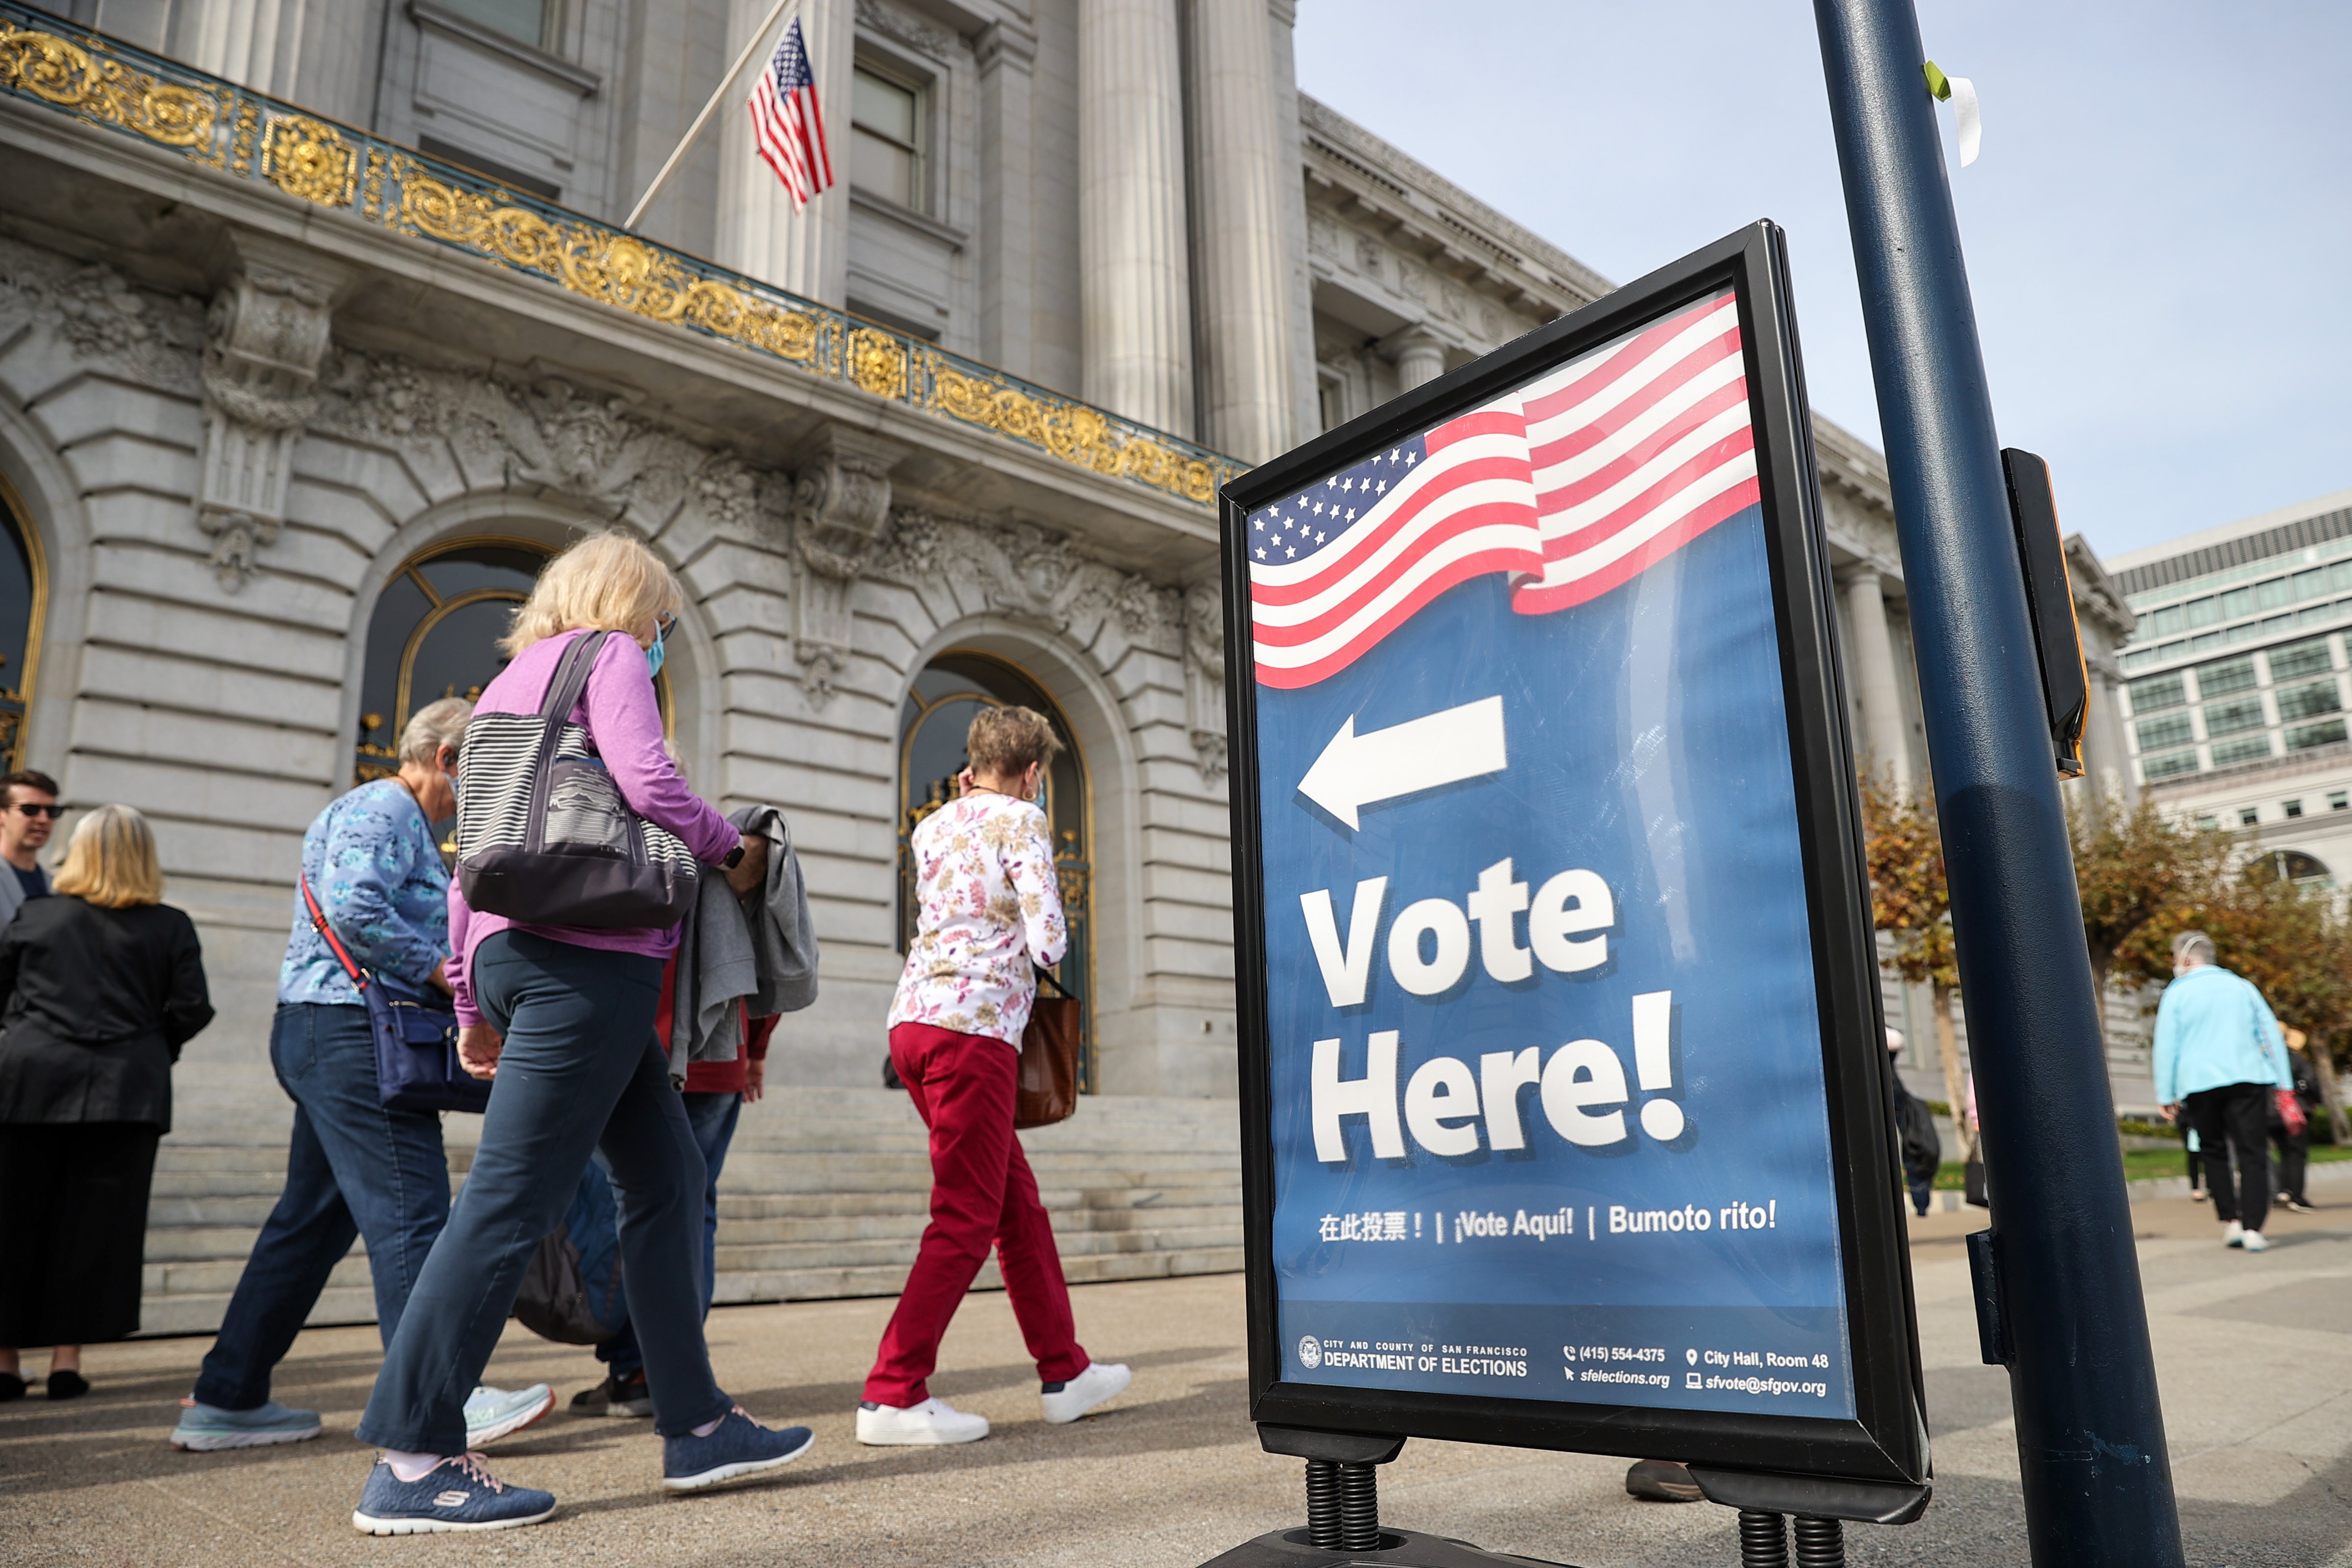 A sign in San Francisco on Oct. 28 directs people to an early voting station for the midterm elections. (Tayfun Coskun—Anadolu Agency/Getty Images)